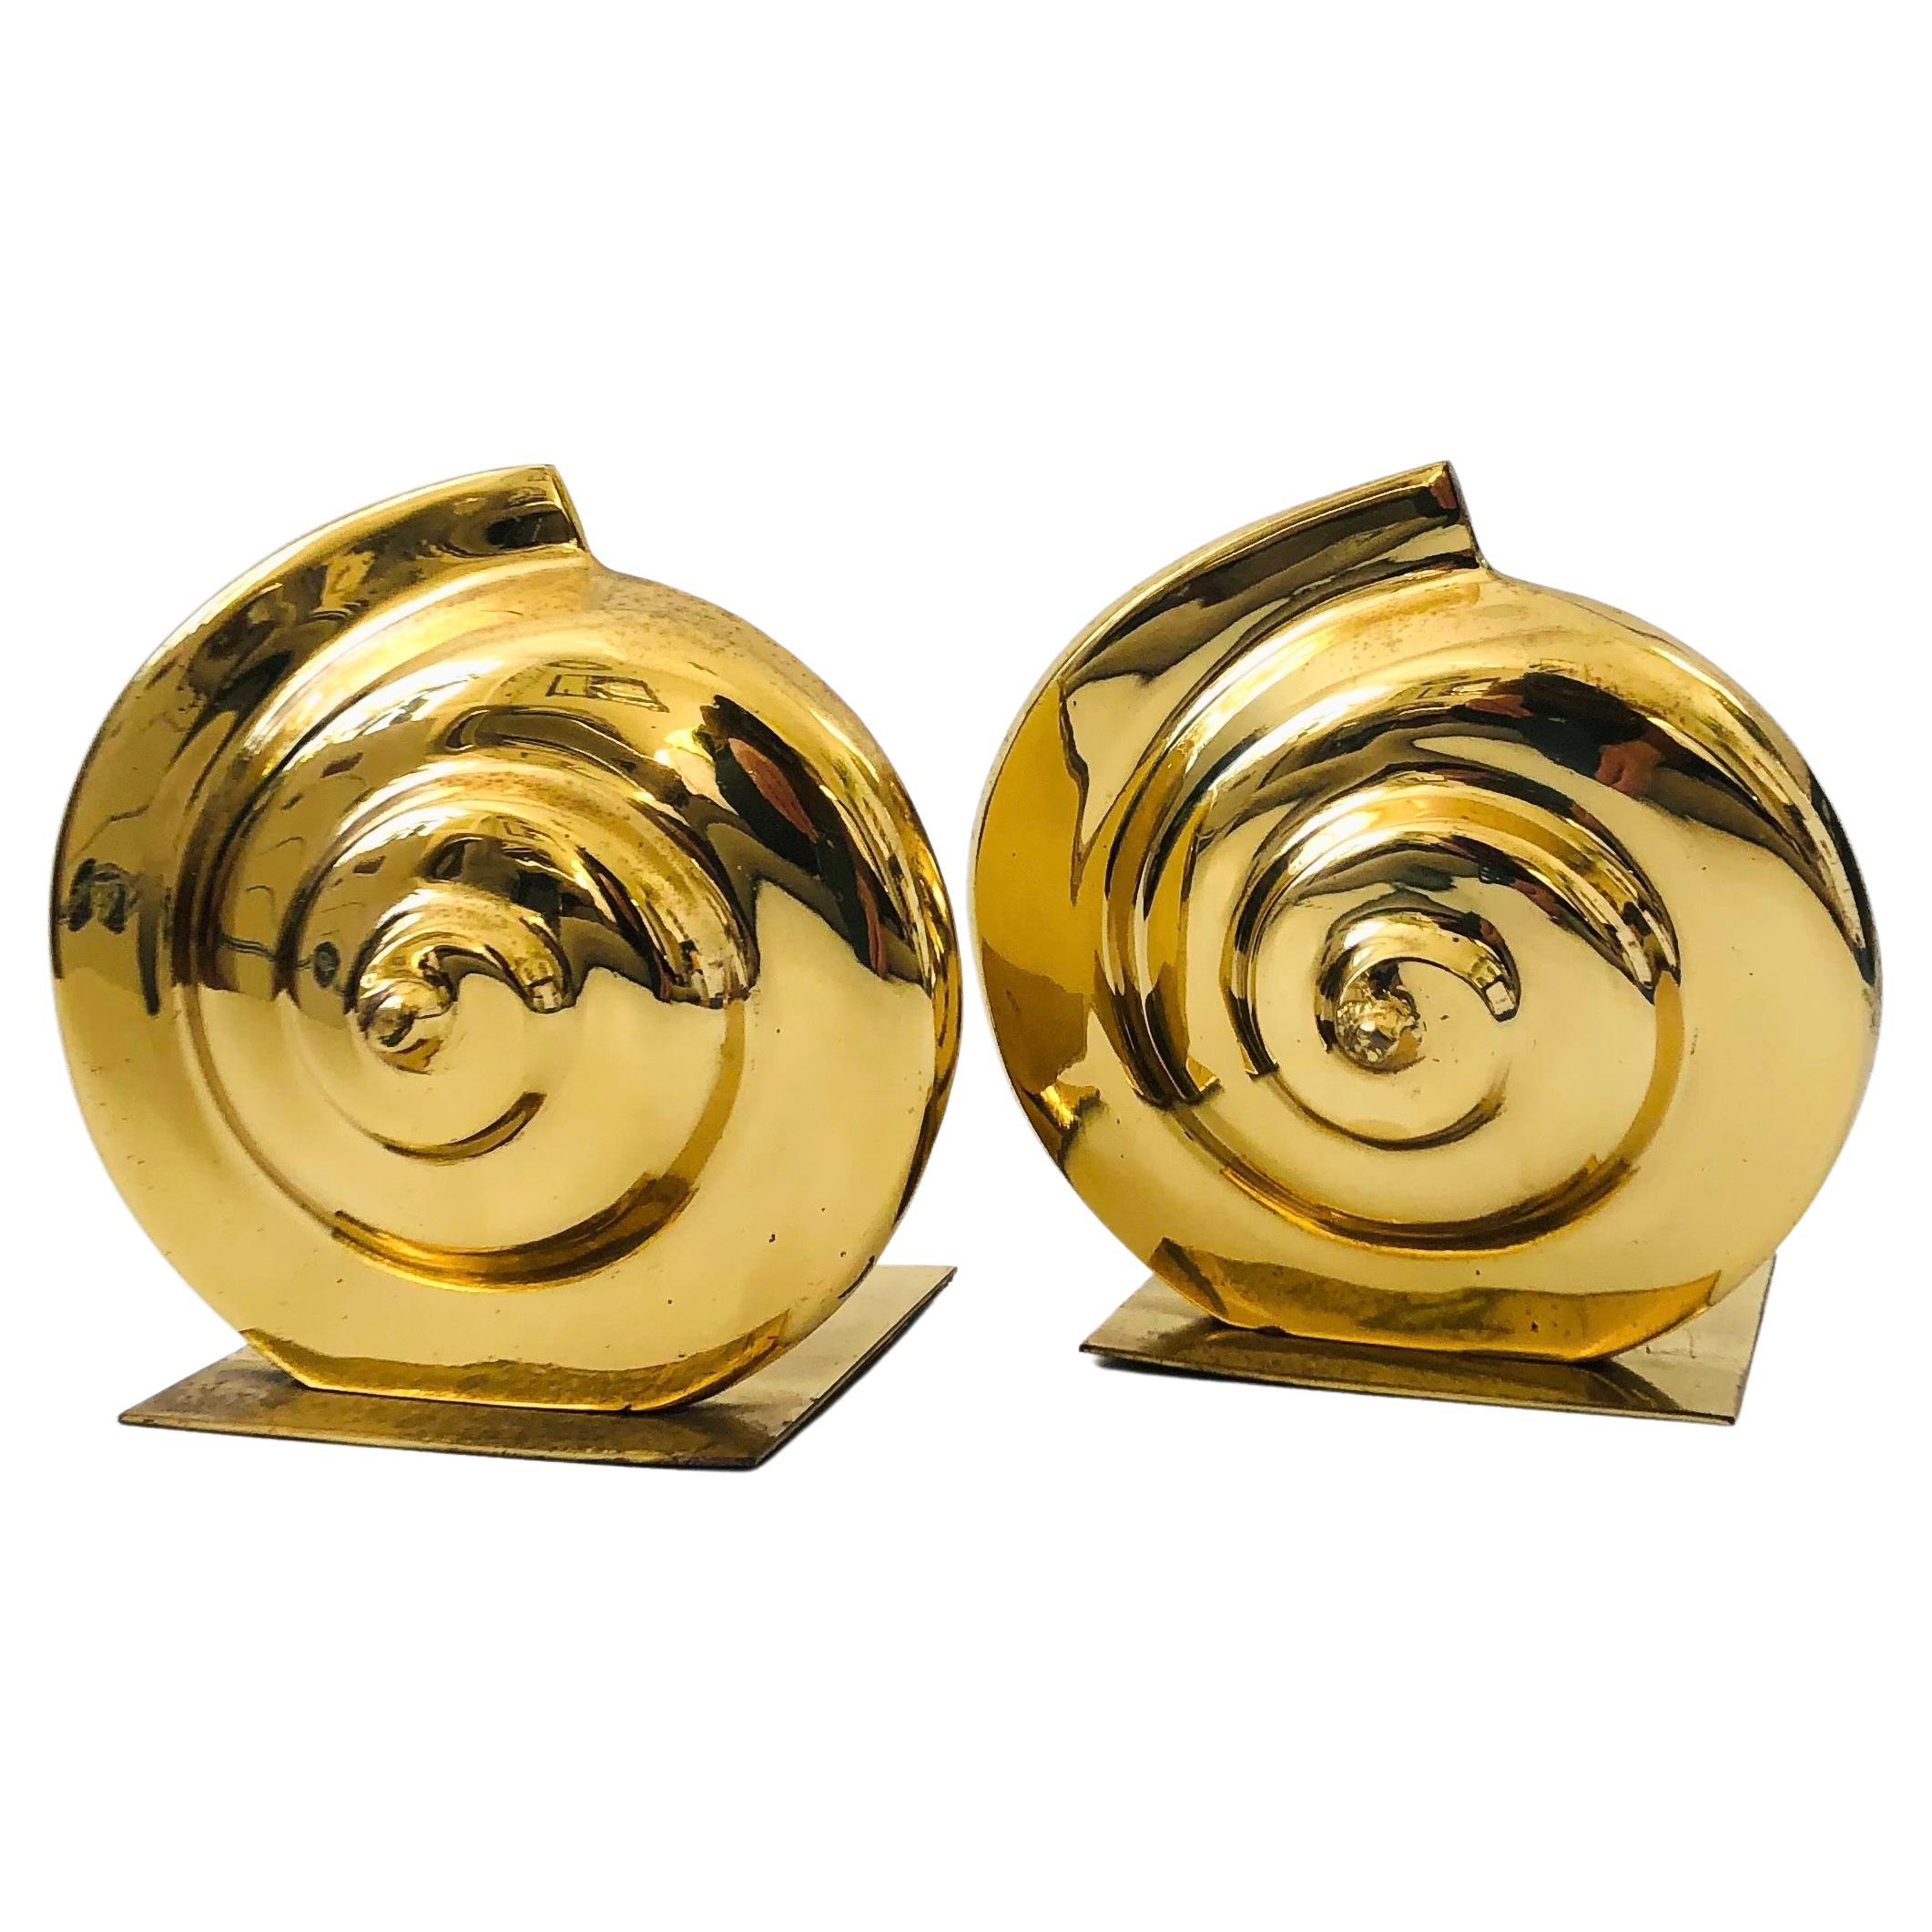 Pair of Vintage Brass Shell Bookends